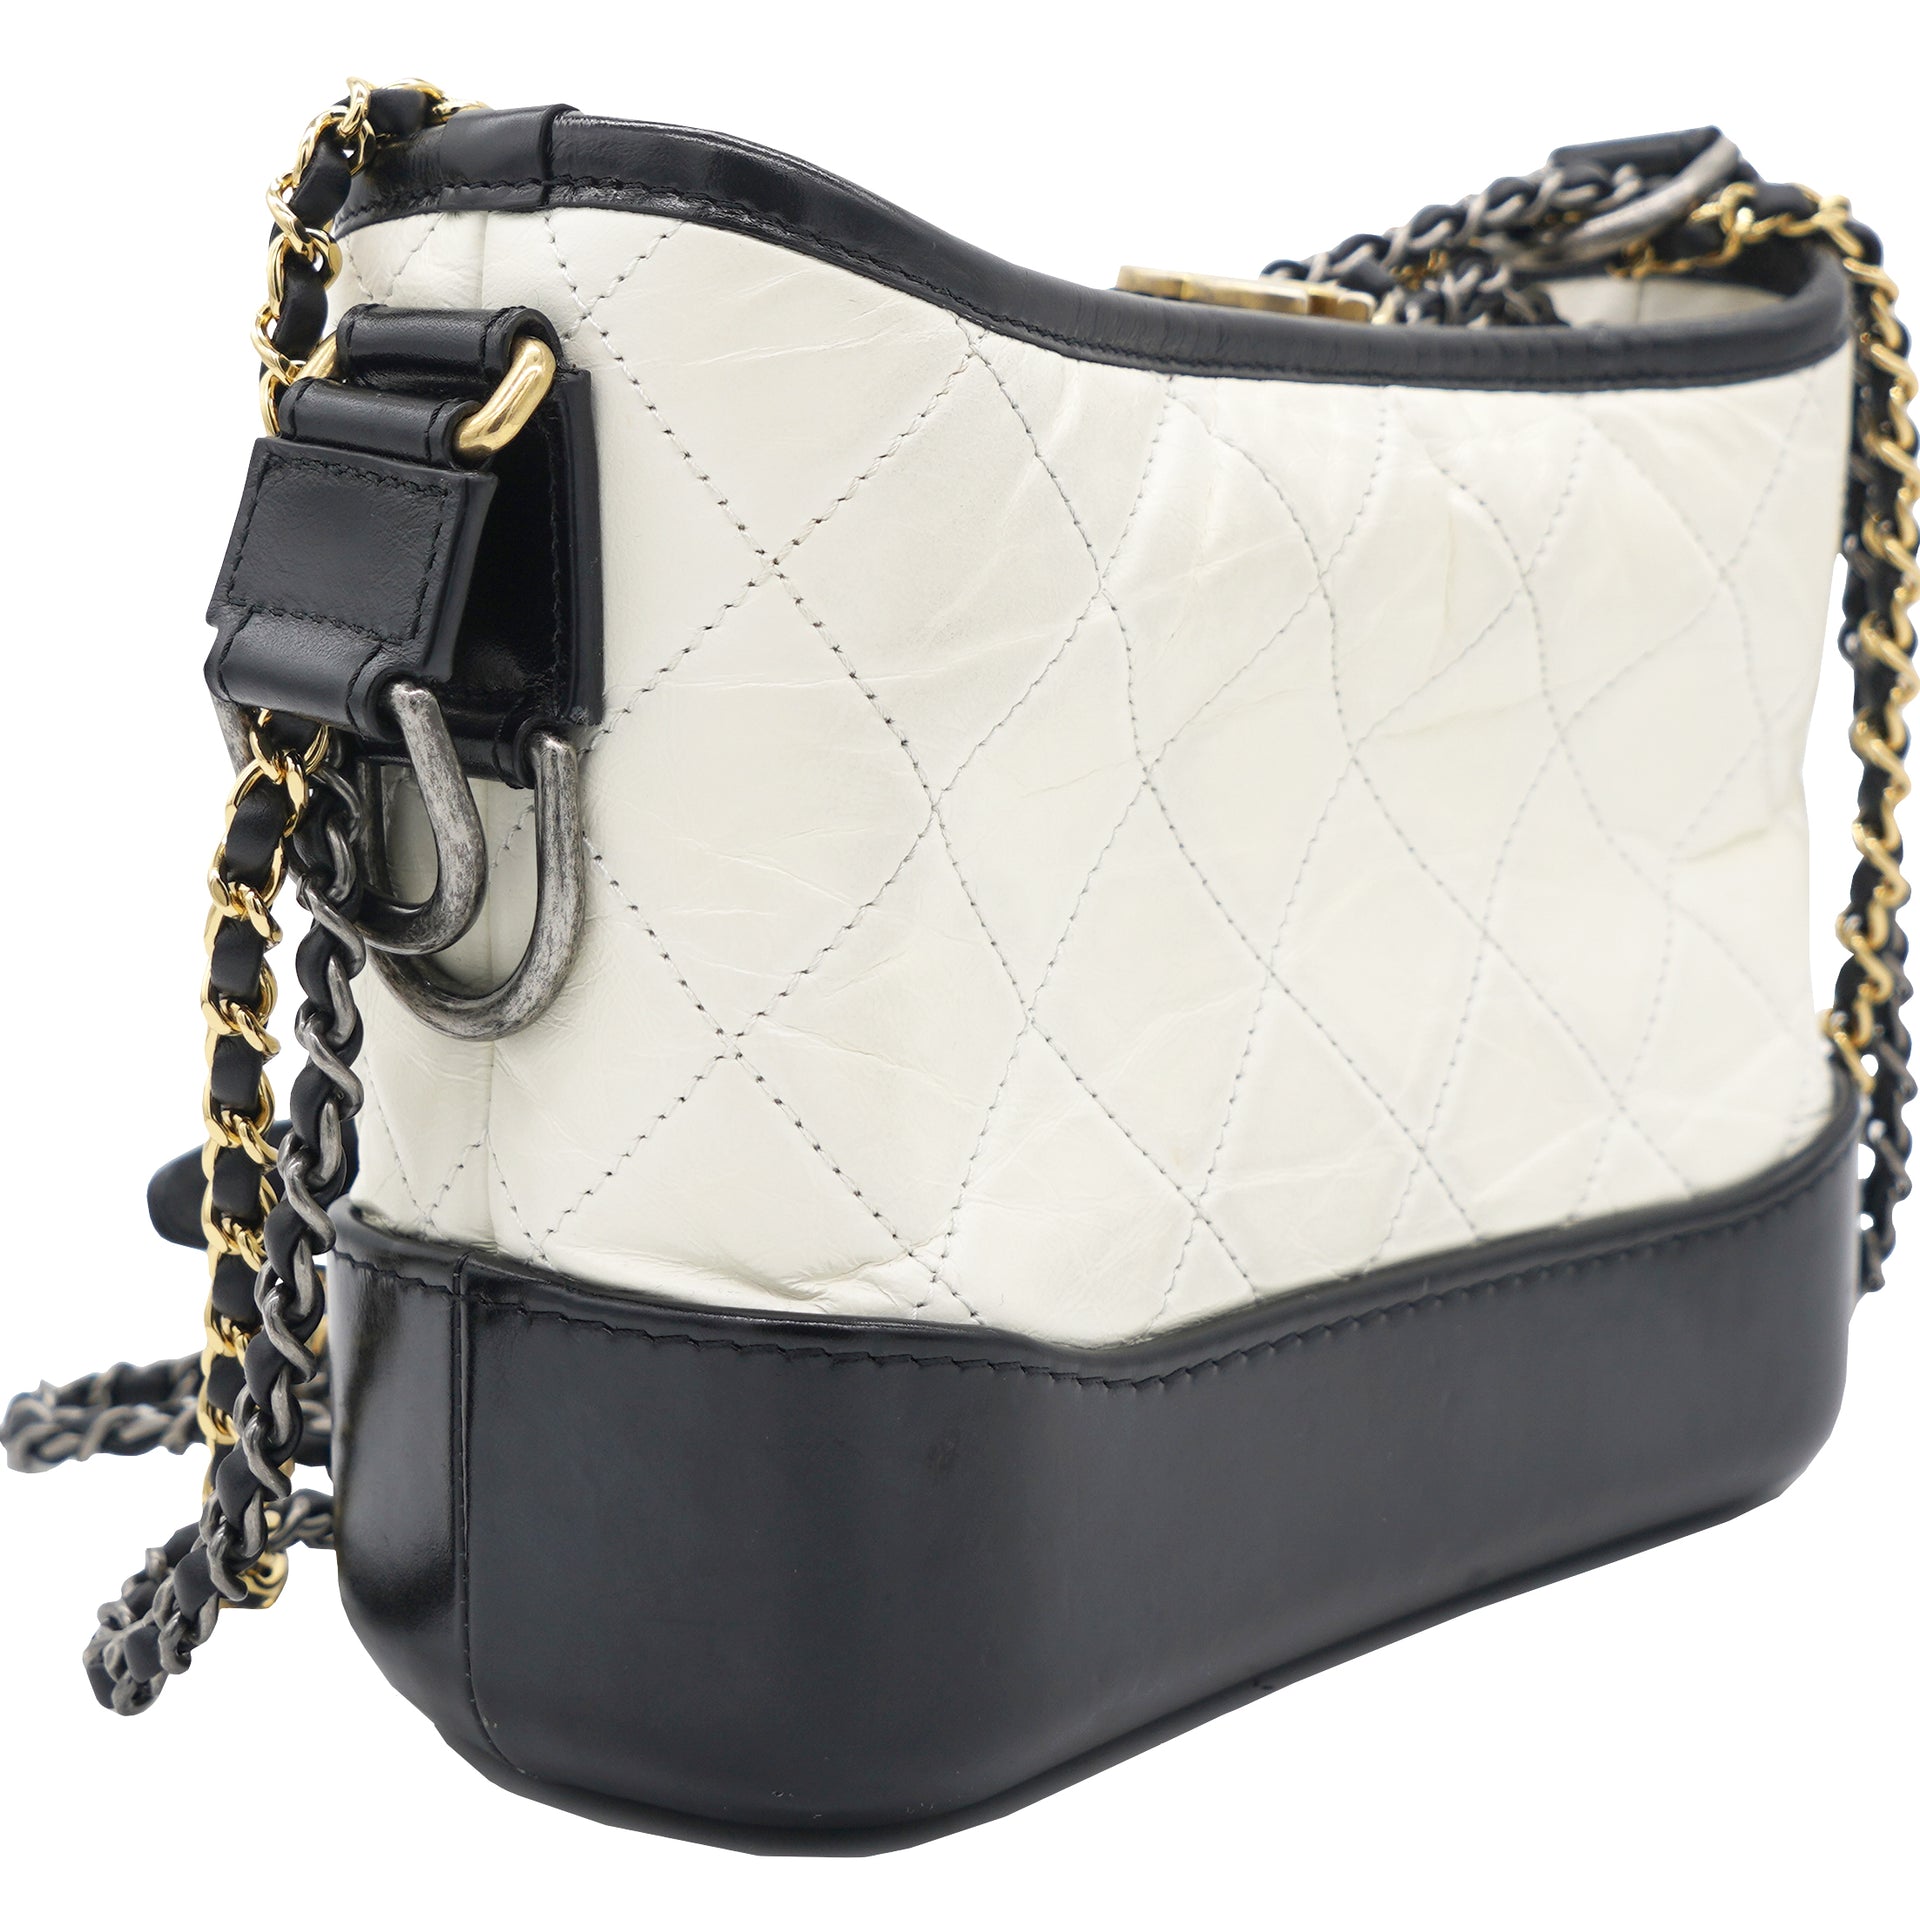 Chanel Gabrielle Hobo Bag Small Black/White in Calfskin with